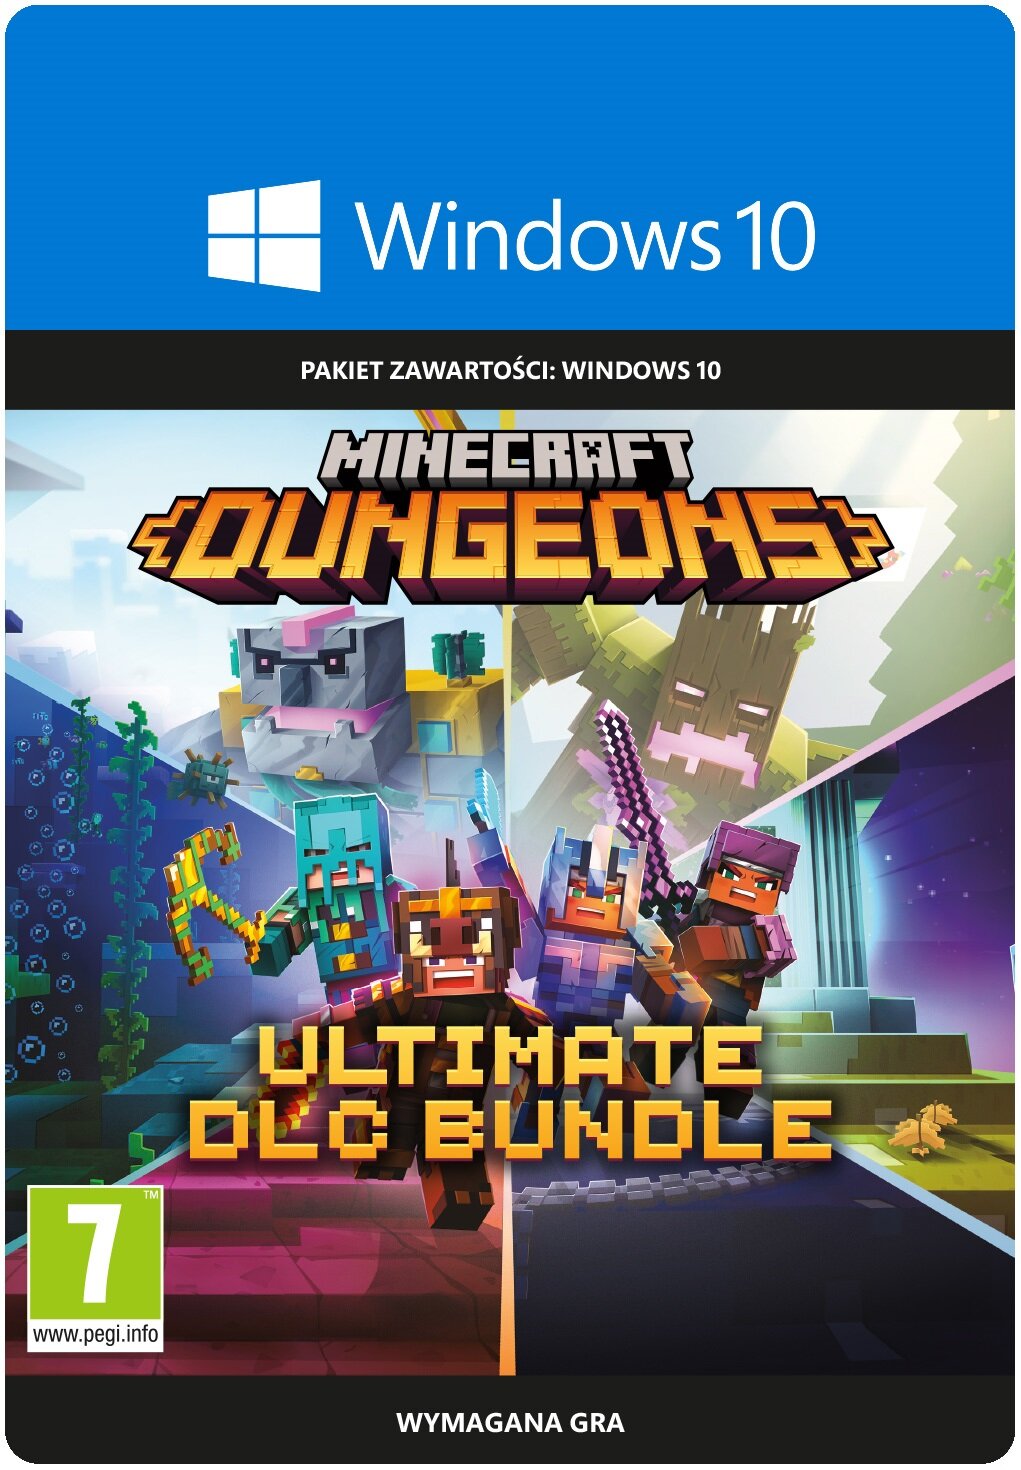 Minecraft OFF PlayStation 47% Ultimate PlayStation, Edition Dungeons